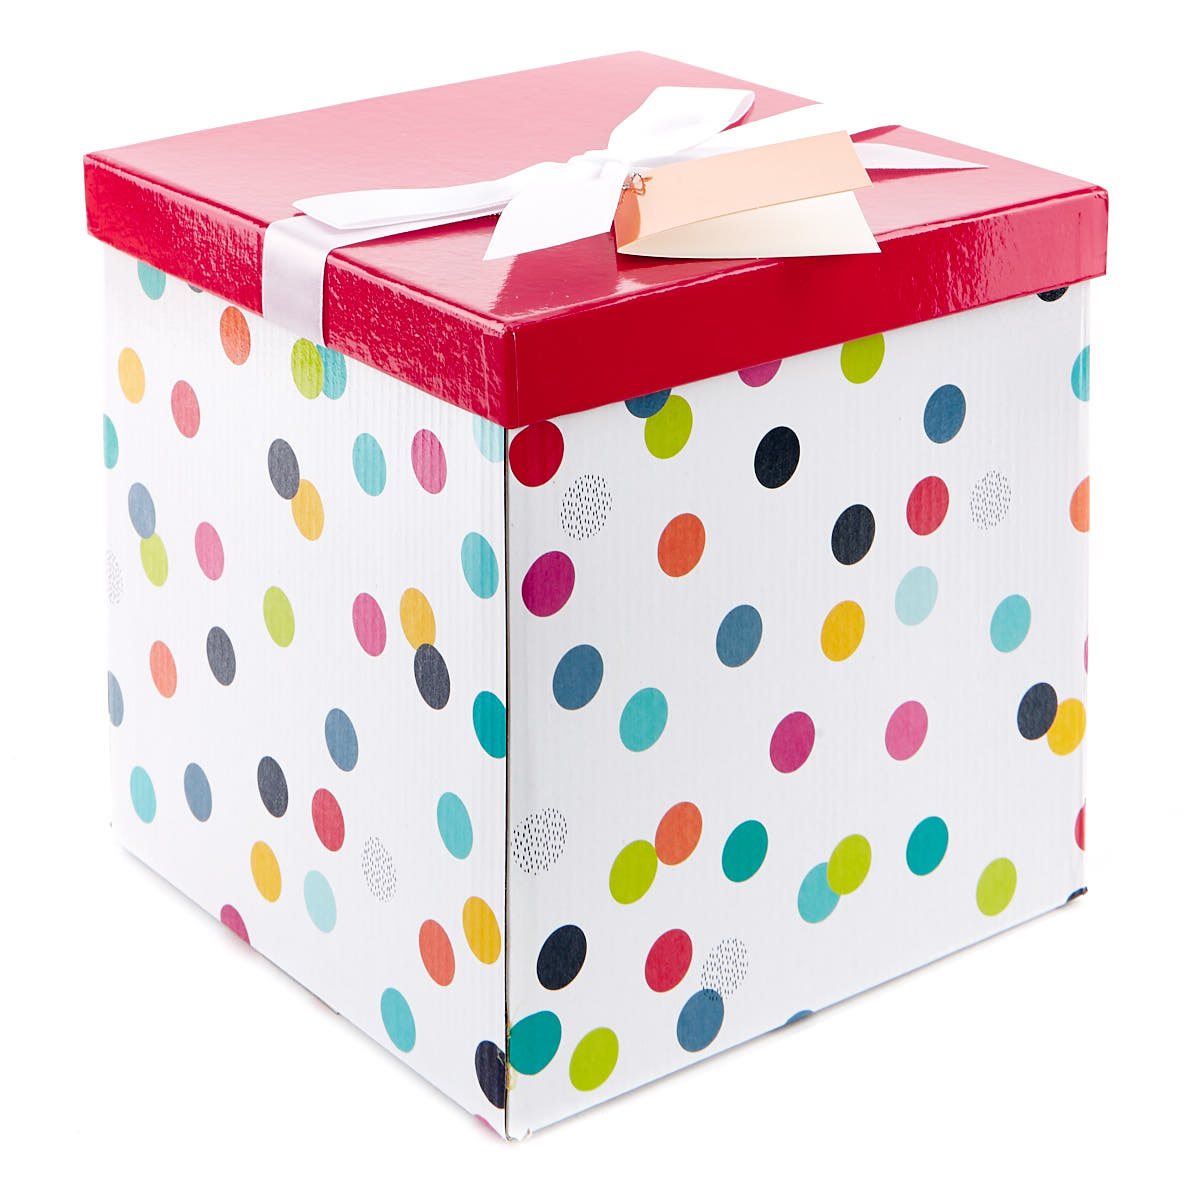 Large Flat-Pack Gift Box - Red & White With Spots